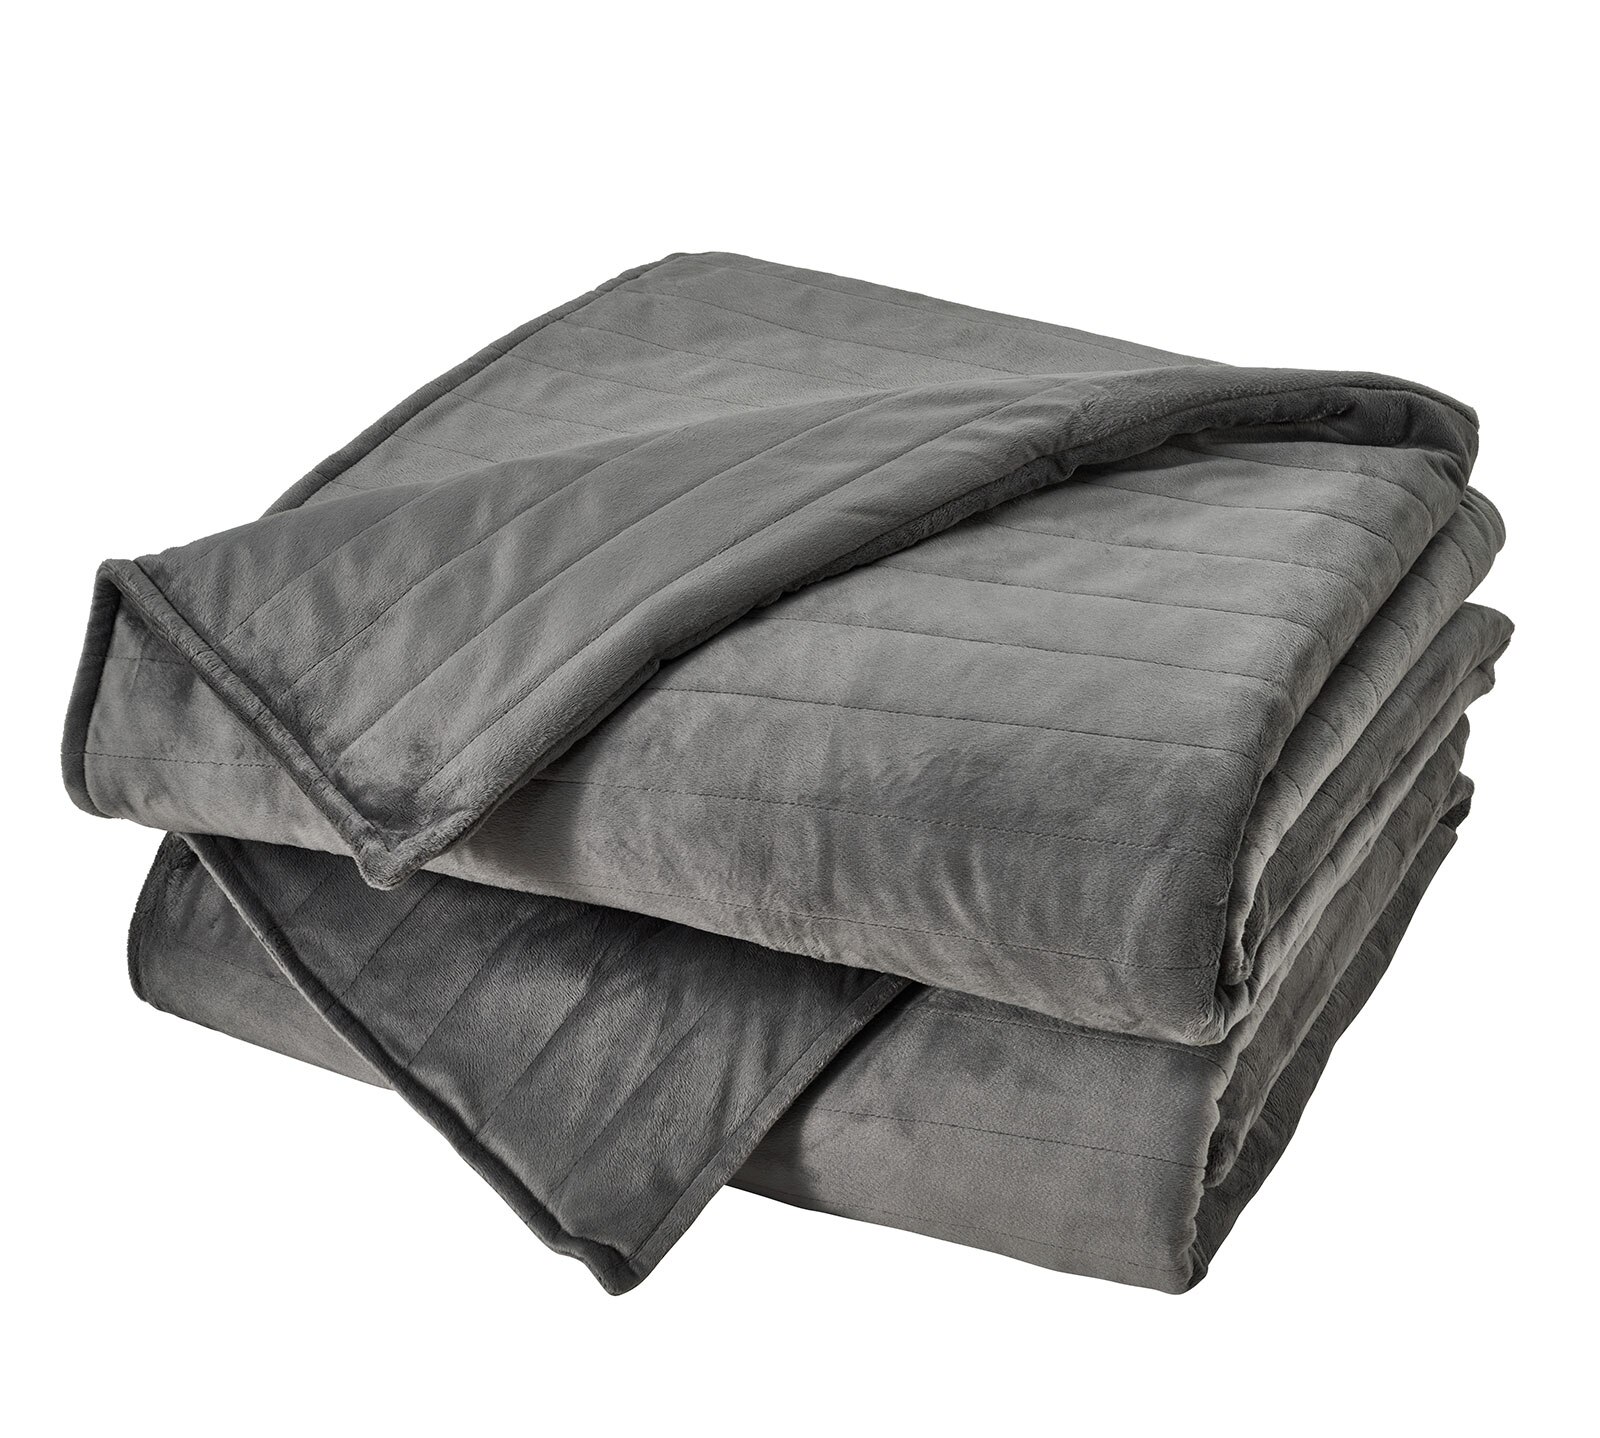 20 lb Weighted Blanket